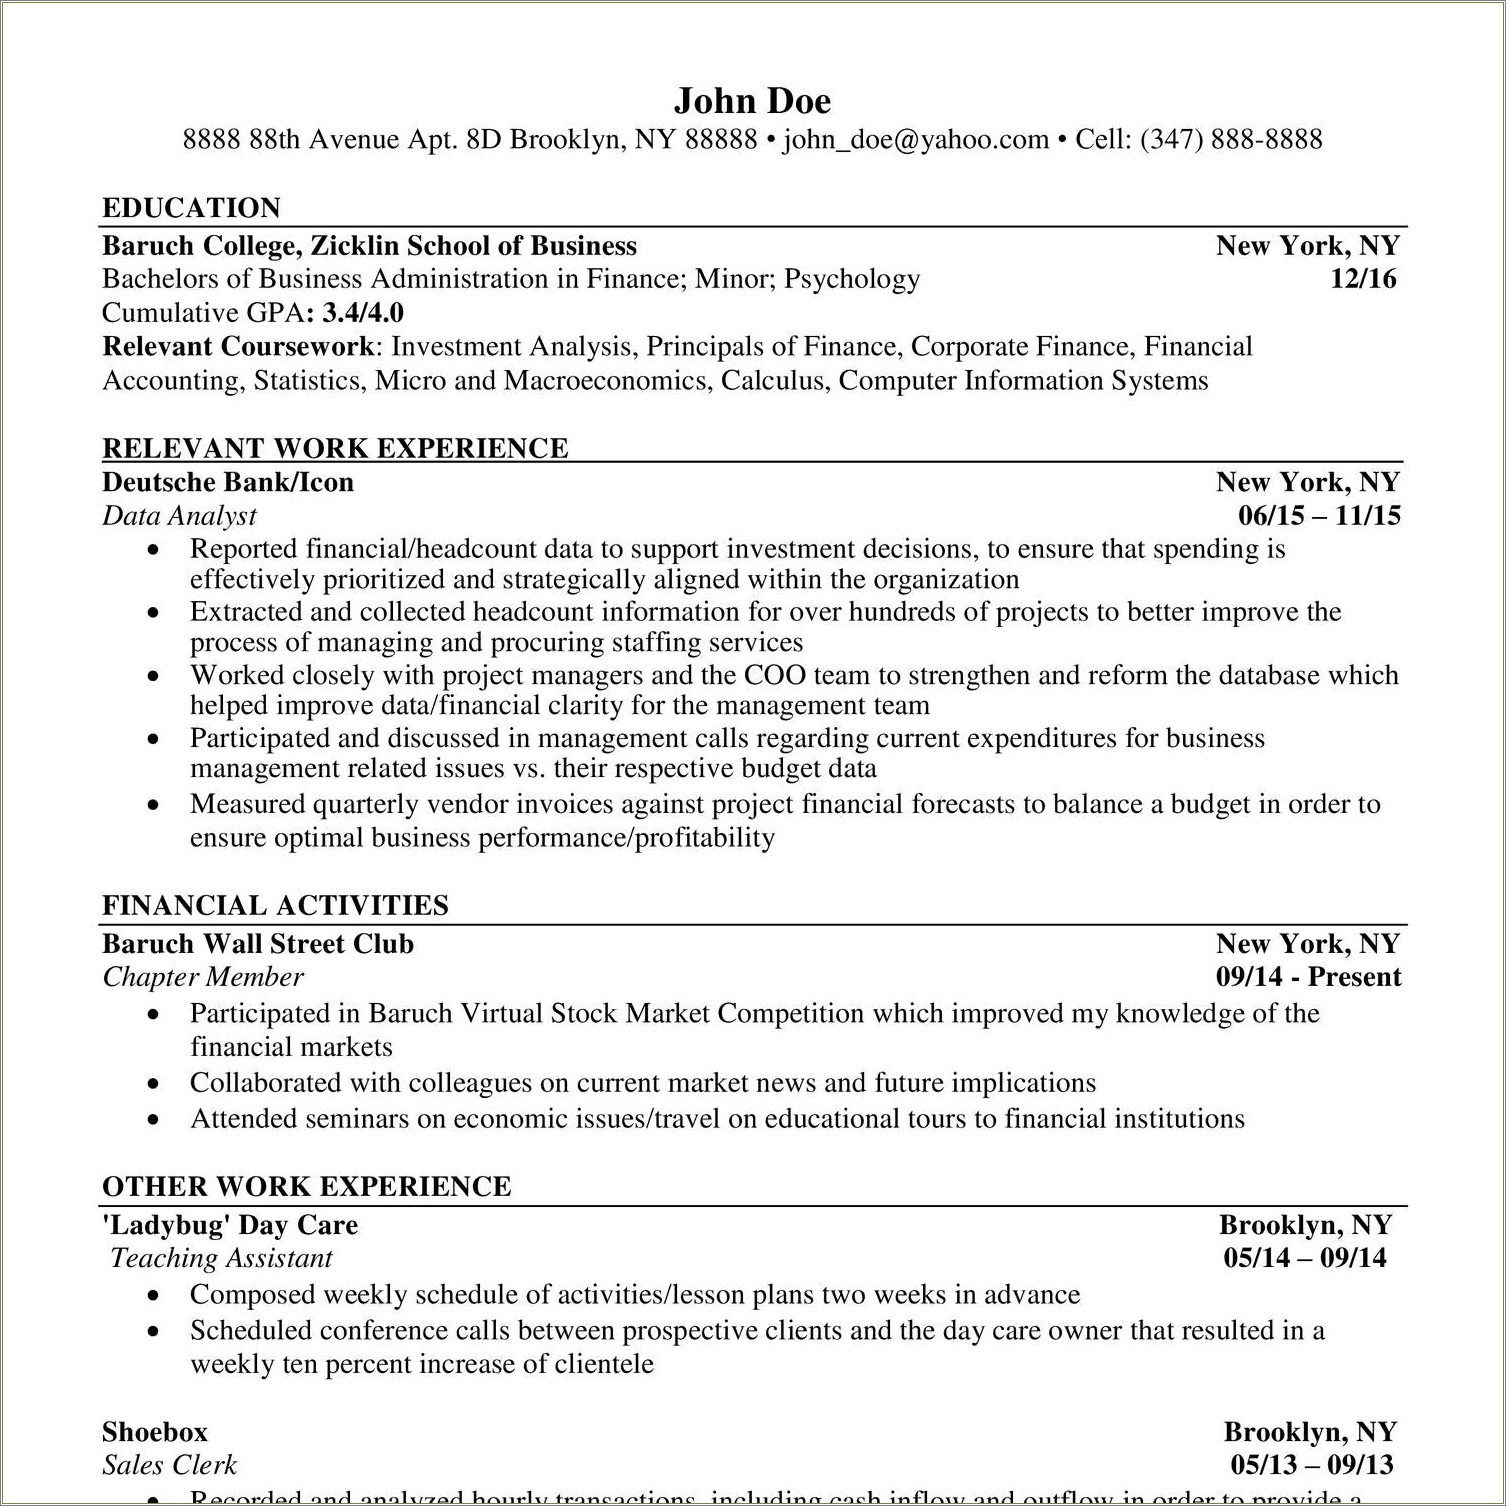 Putting Codeacdemy Projects On Resume Reddit